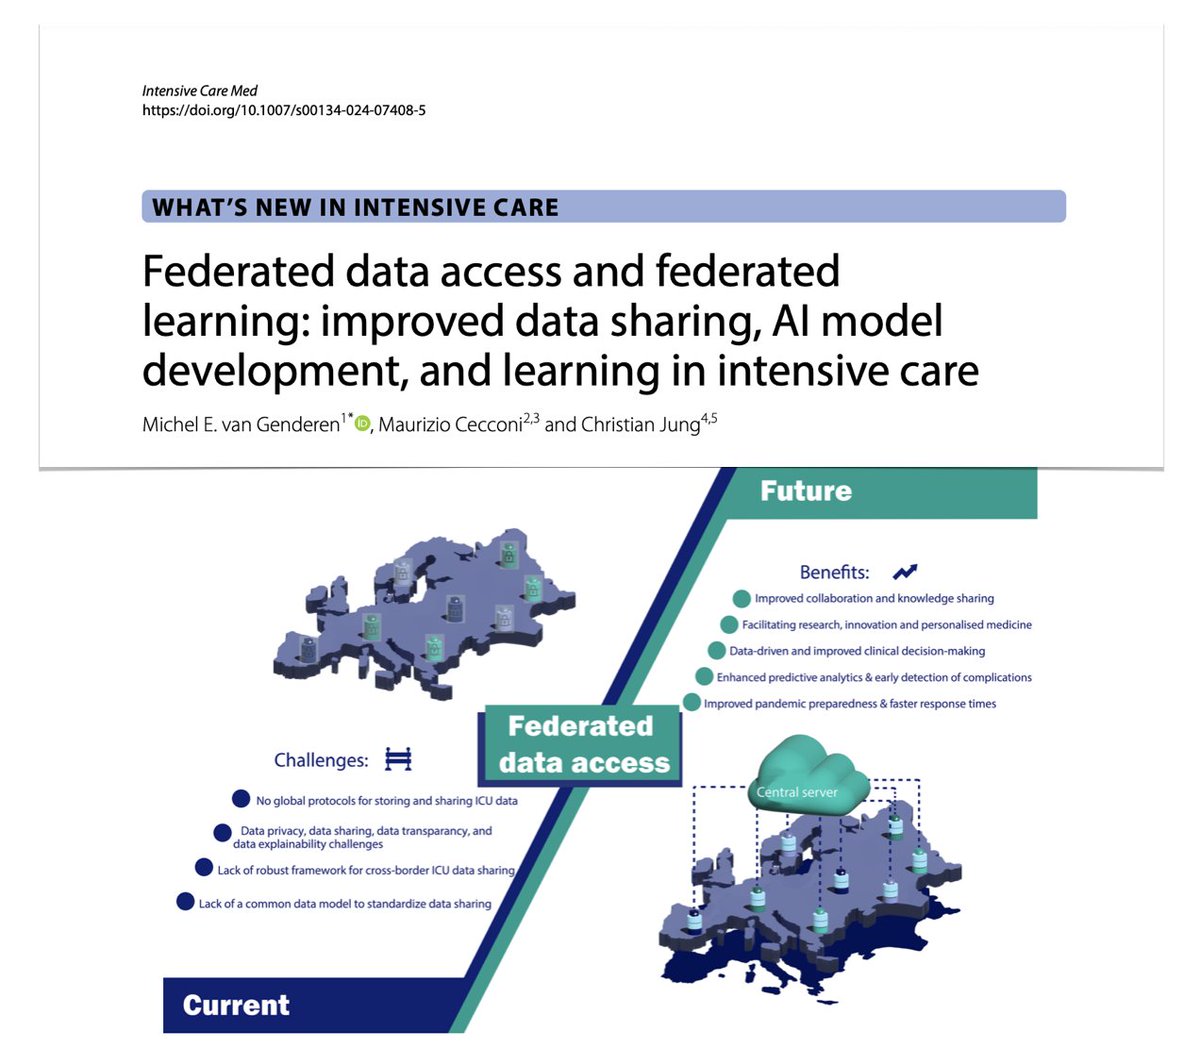 Improved data sharing, #AI model development and learning in #ICU: 💻 federated data access & federated learning #FL 💻 FL & bedside support 💻 advantages of FL 💻 challenges of FL 💻 data‑driven ICU medicine Free to read #FOAMcc on @yourICM 🔓rdcu.be/dFpVu